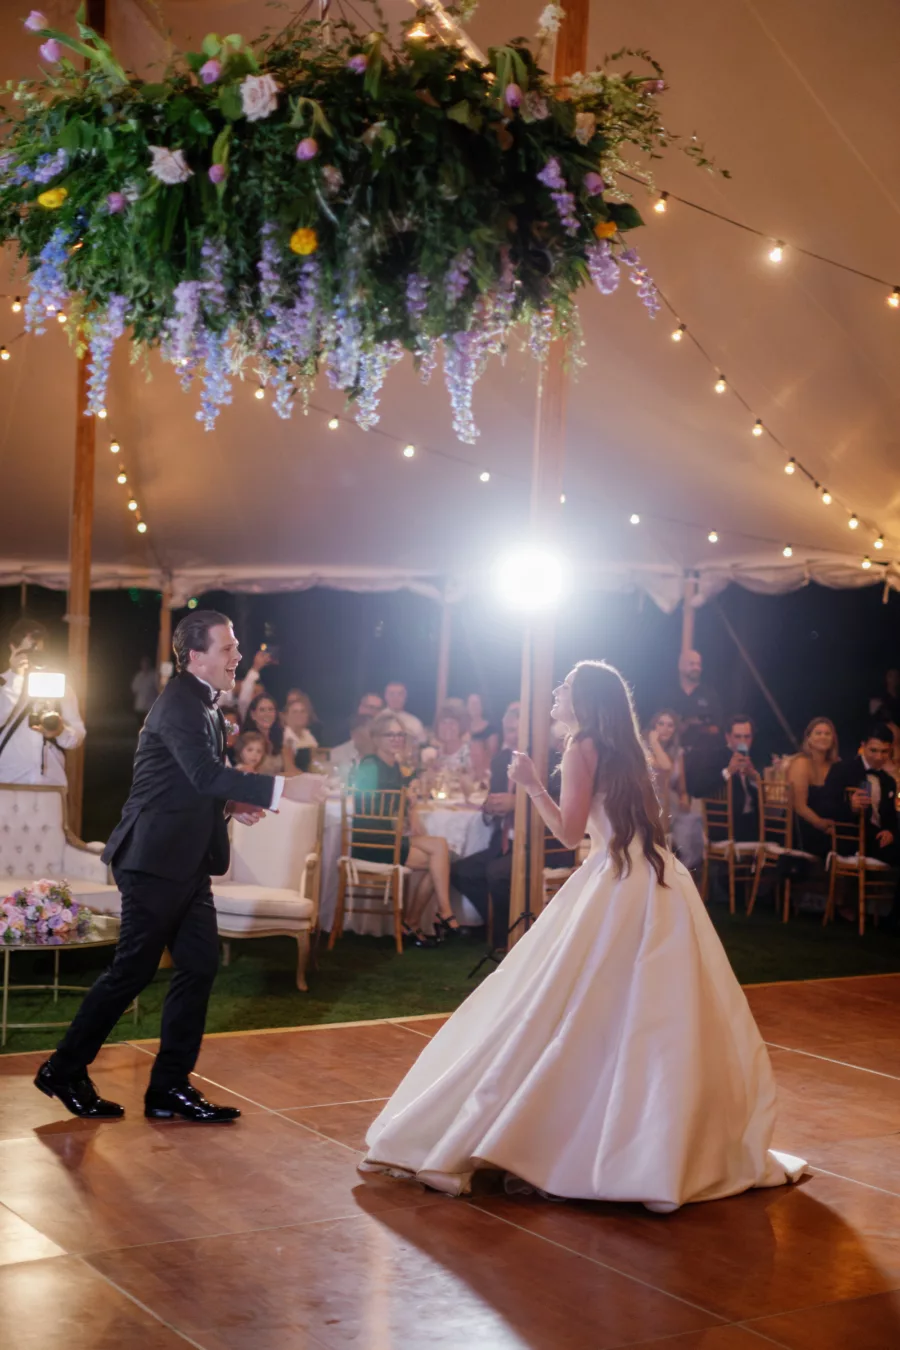 Bride and Groom's Choreographed First Dance Wedding Portrait | Luxurious Tented Old Florida Wedding Reception Ideas | Pastel Wildflower Chandelier Inspiration